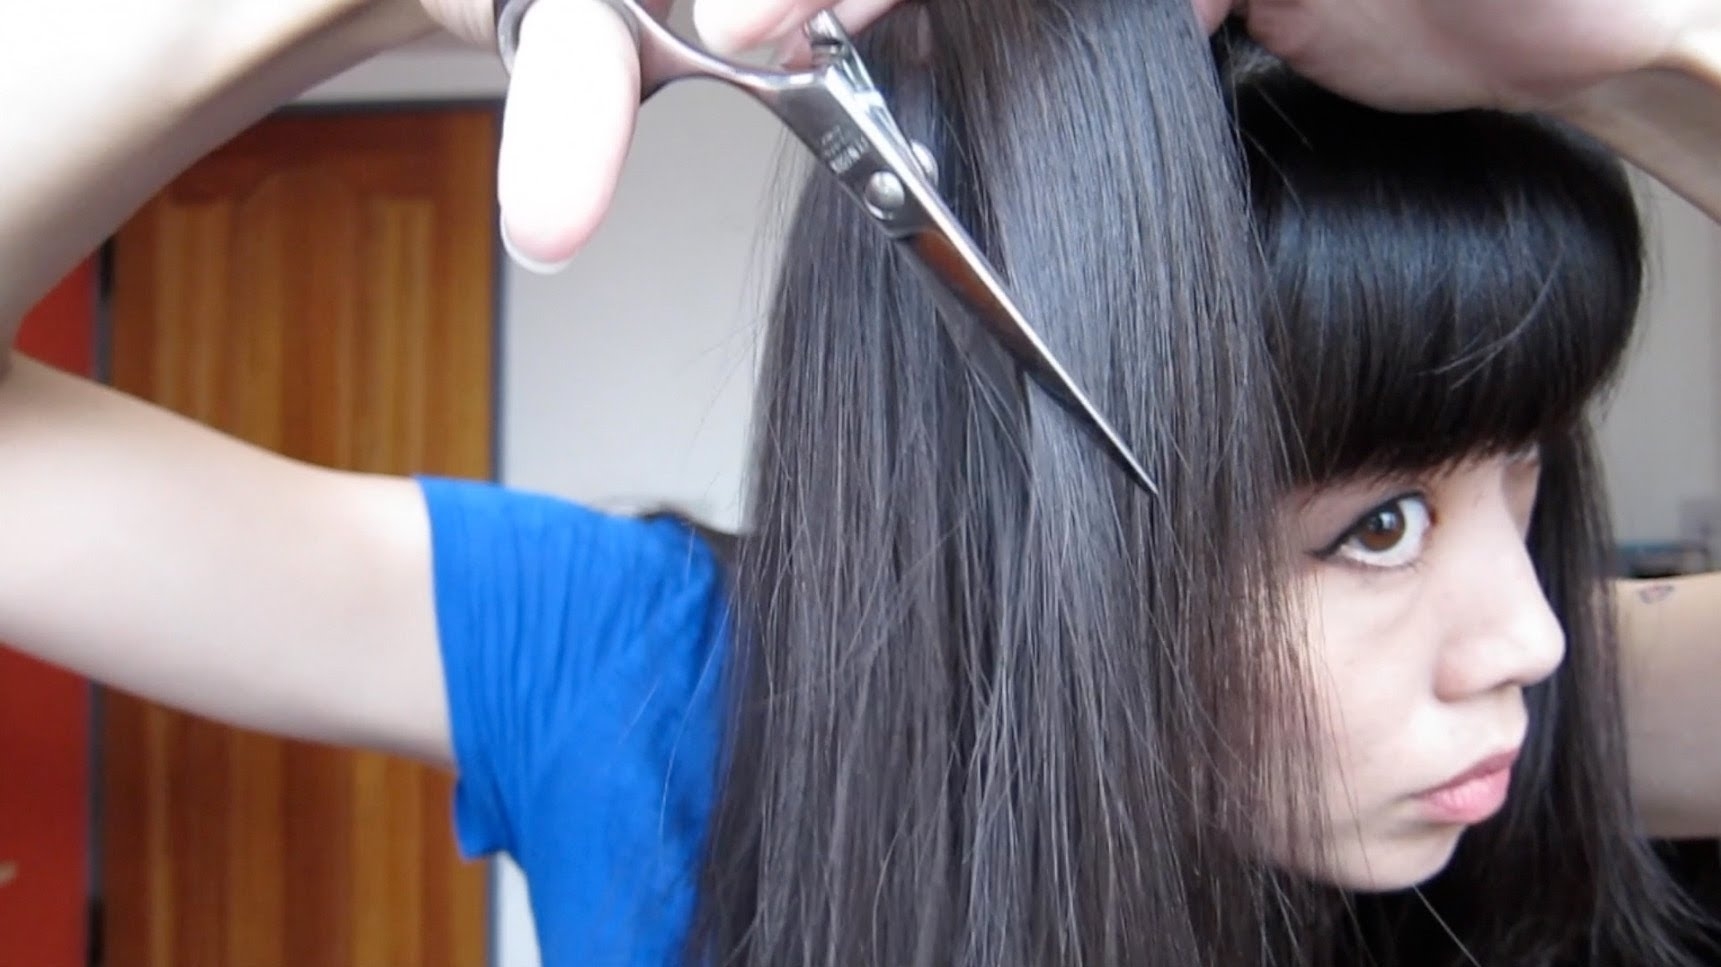 How To Thin Out Your Hair With Shears Or A Razor - Youtube pertaining to Hair Cut For Thin Hair At Home